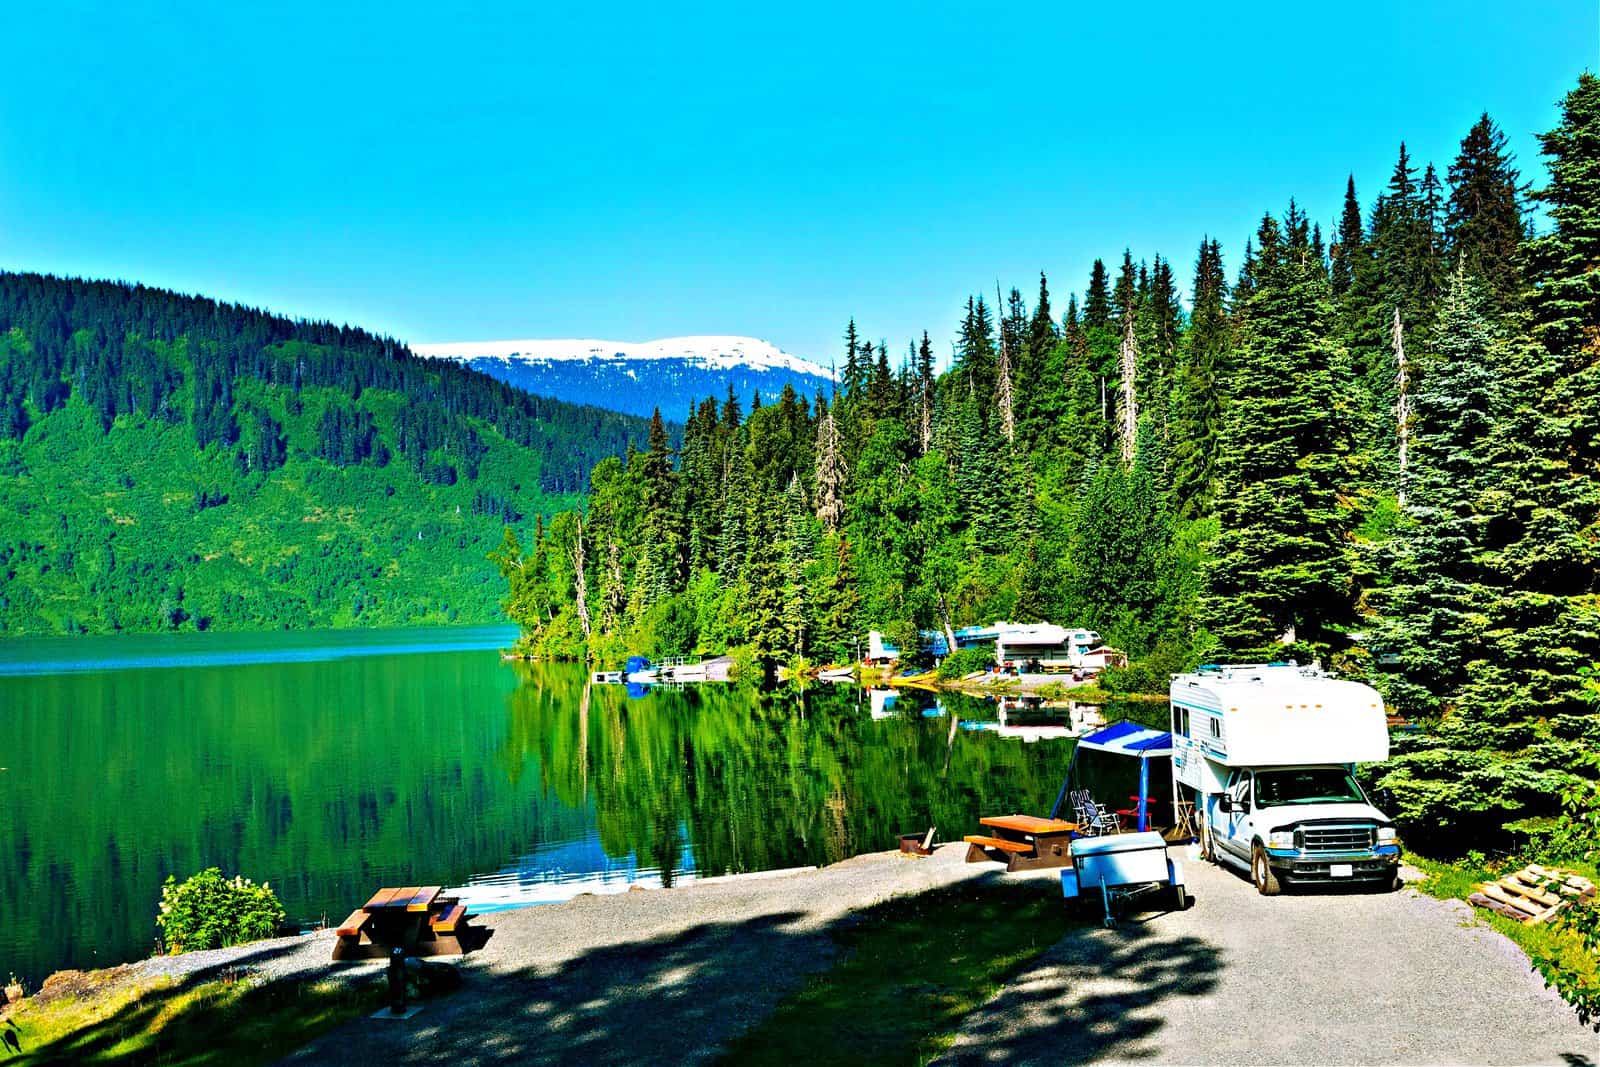 Camping by the beautiful mountain lake in the summer along Alaska Highway